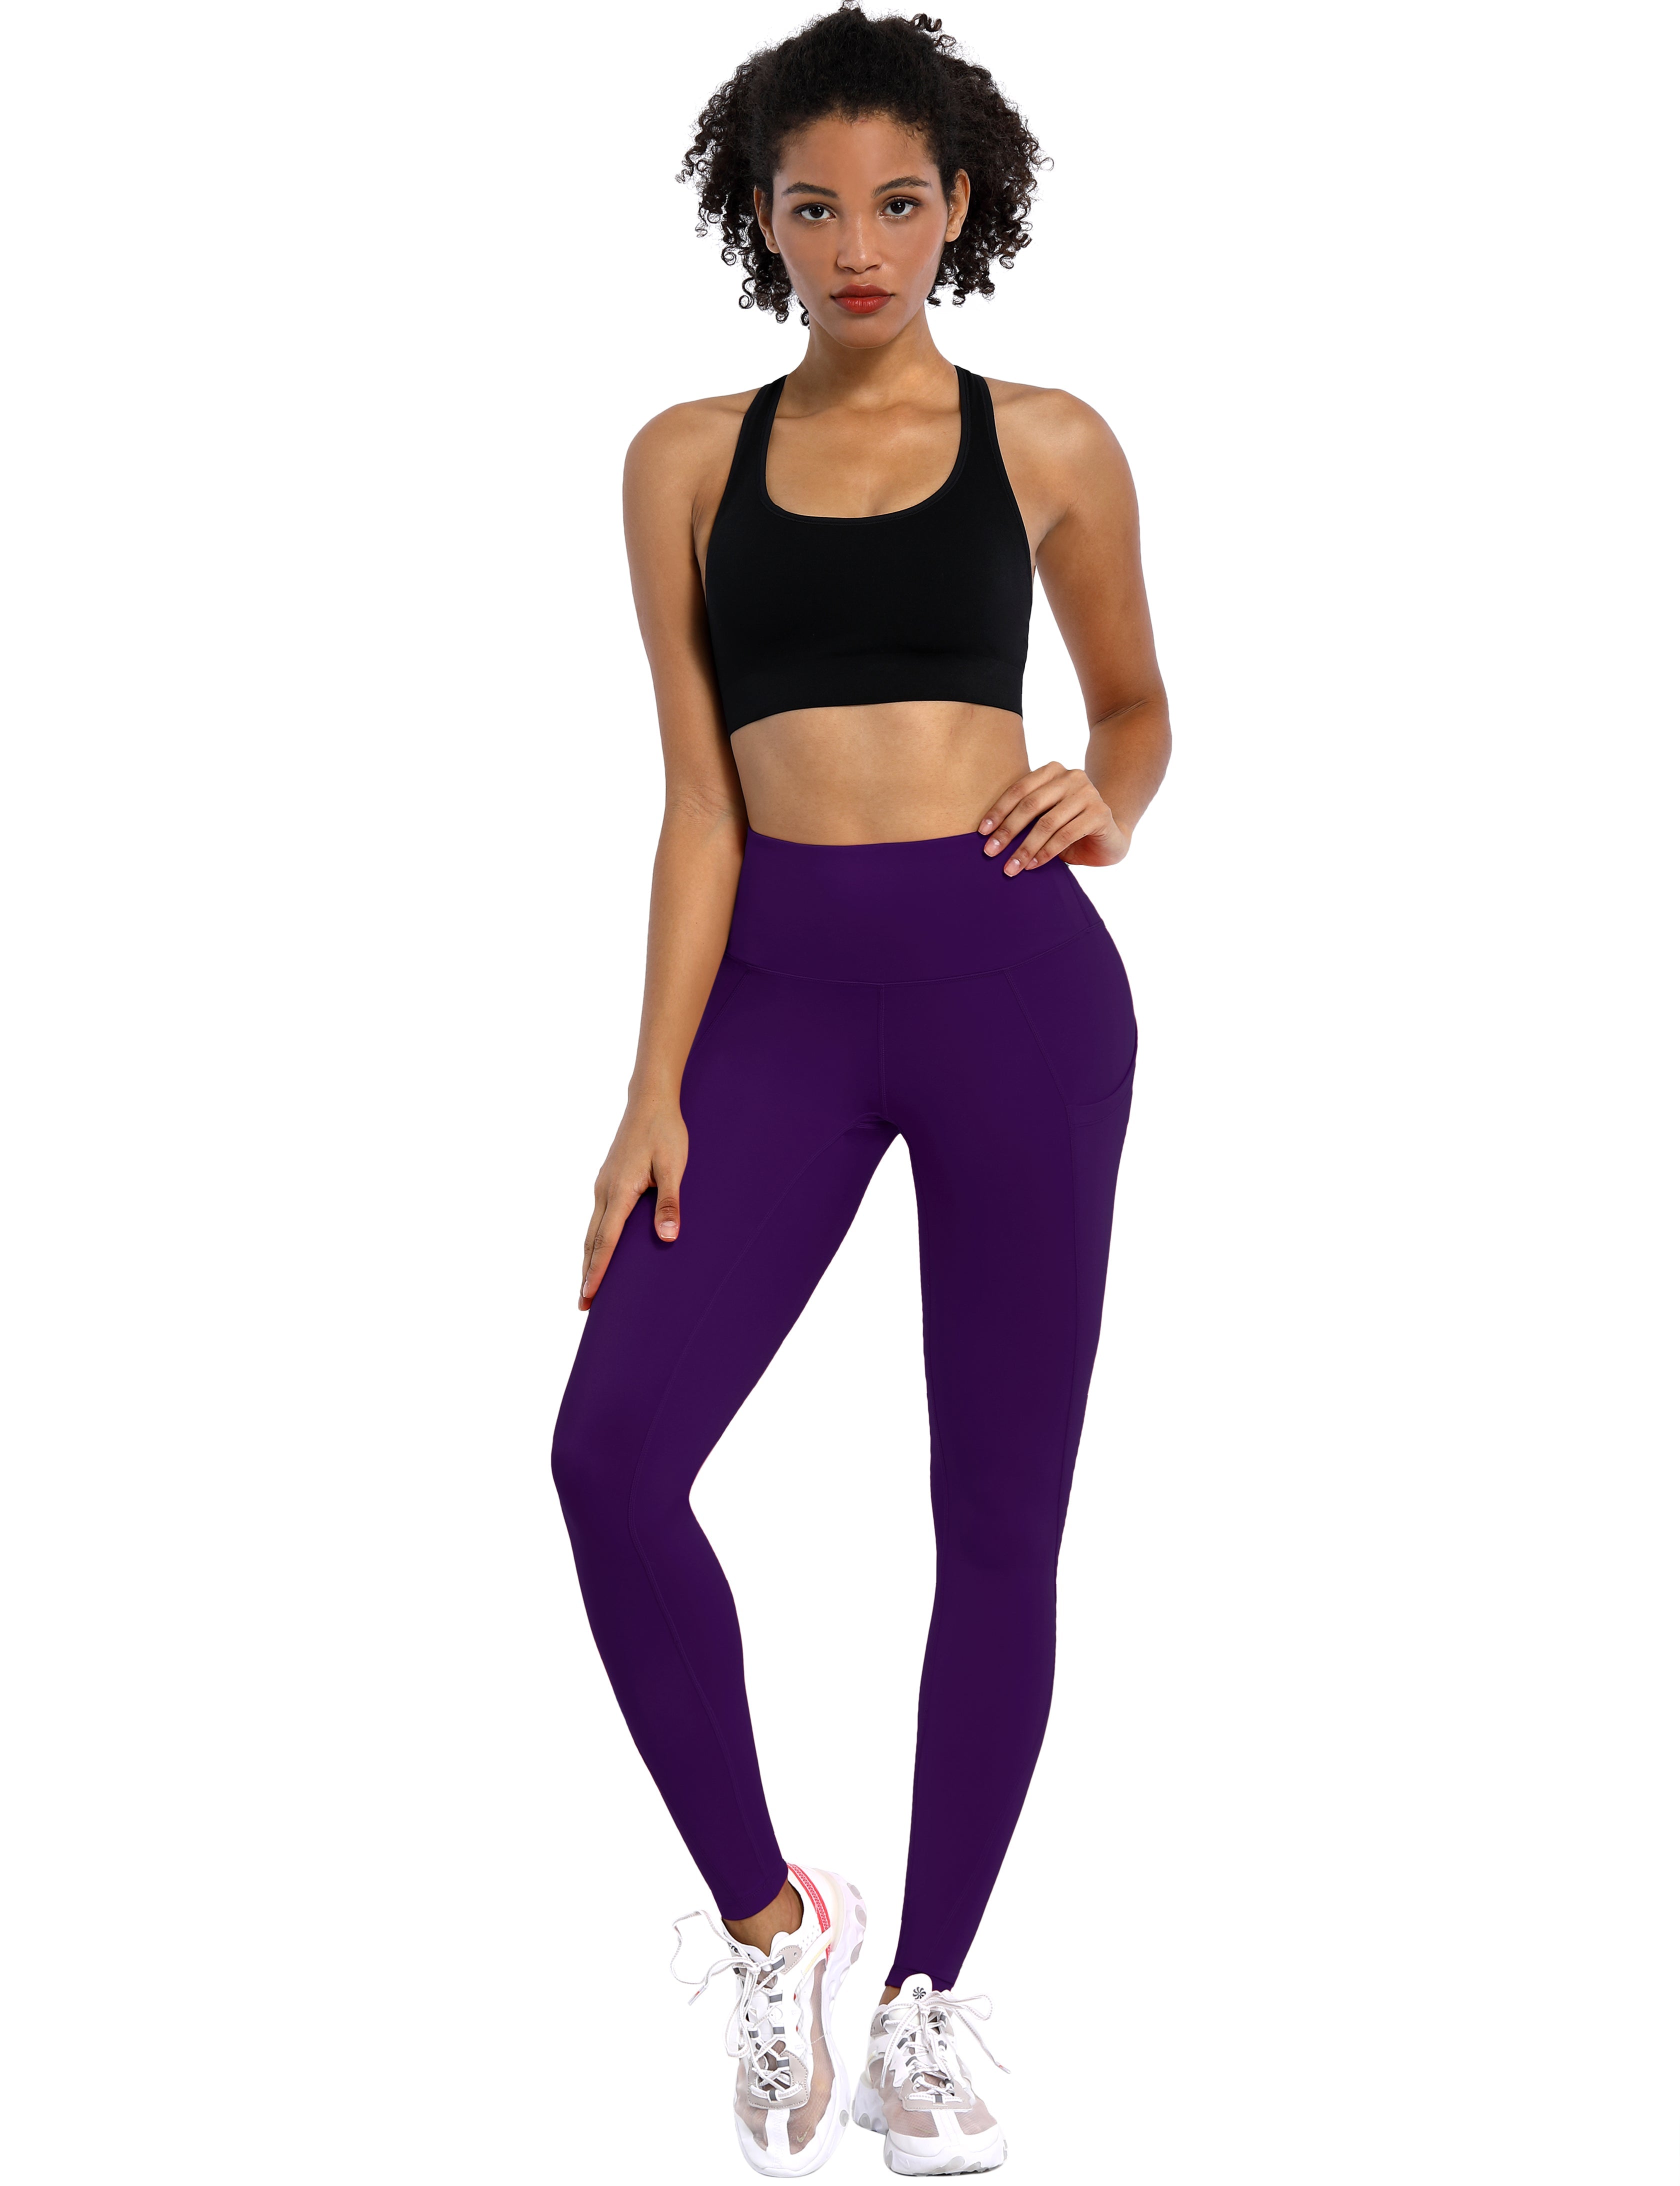 High Waist Side Pockets Jogging Pants pansypurple 75% Nylon, 25% Spandex Fabric doesn't attract lint easily 4-way stretch No see-through Moisture-wicking Tummy control Inner pocket